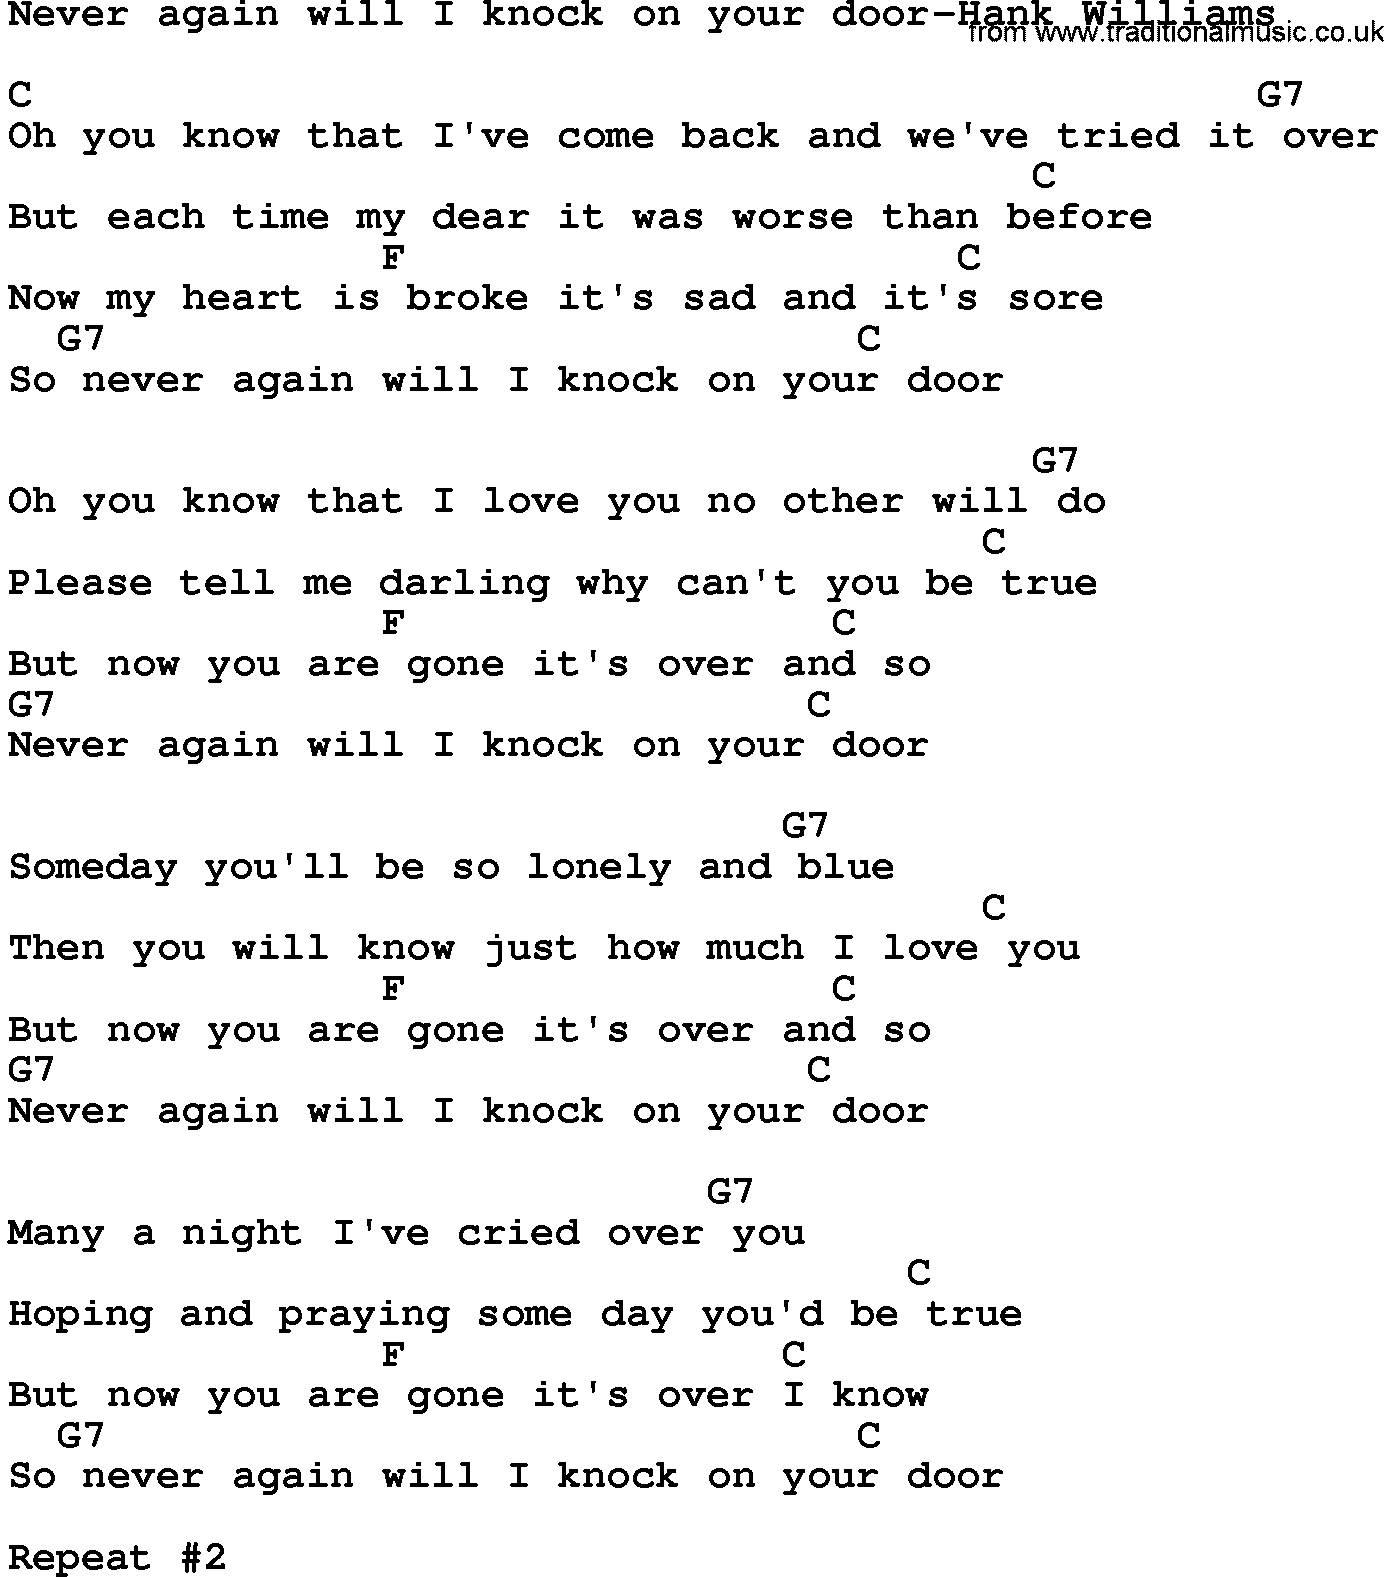 Country music song: Never Again Will I Knock On Your Door-Hank Williams  lyrics and chords